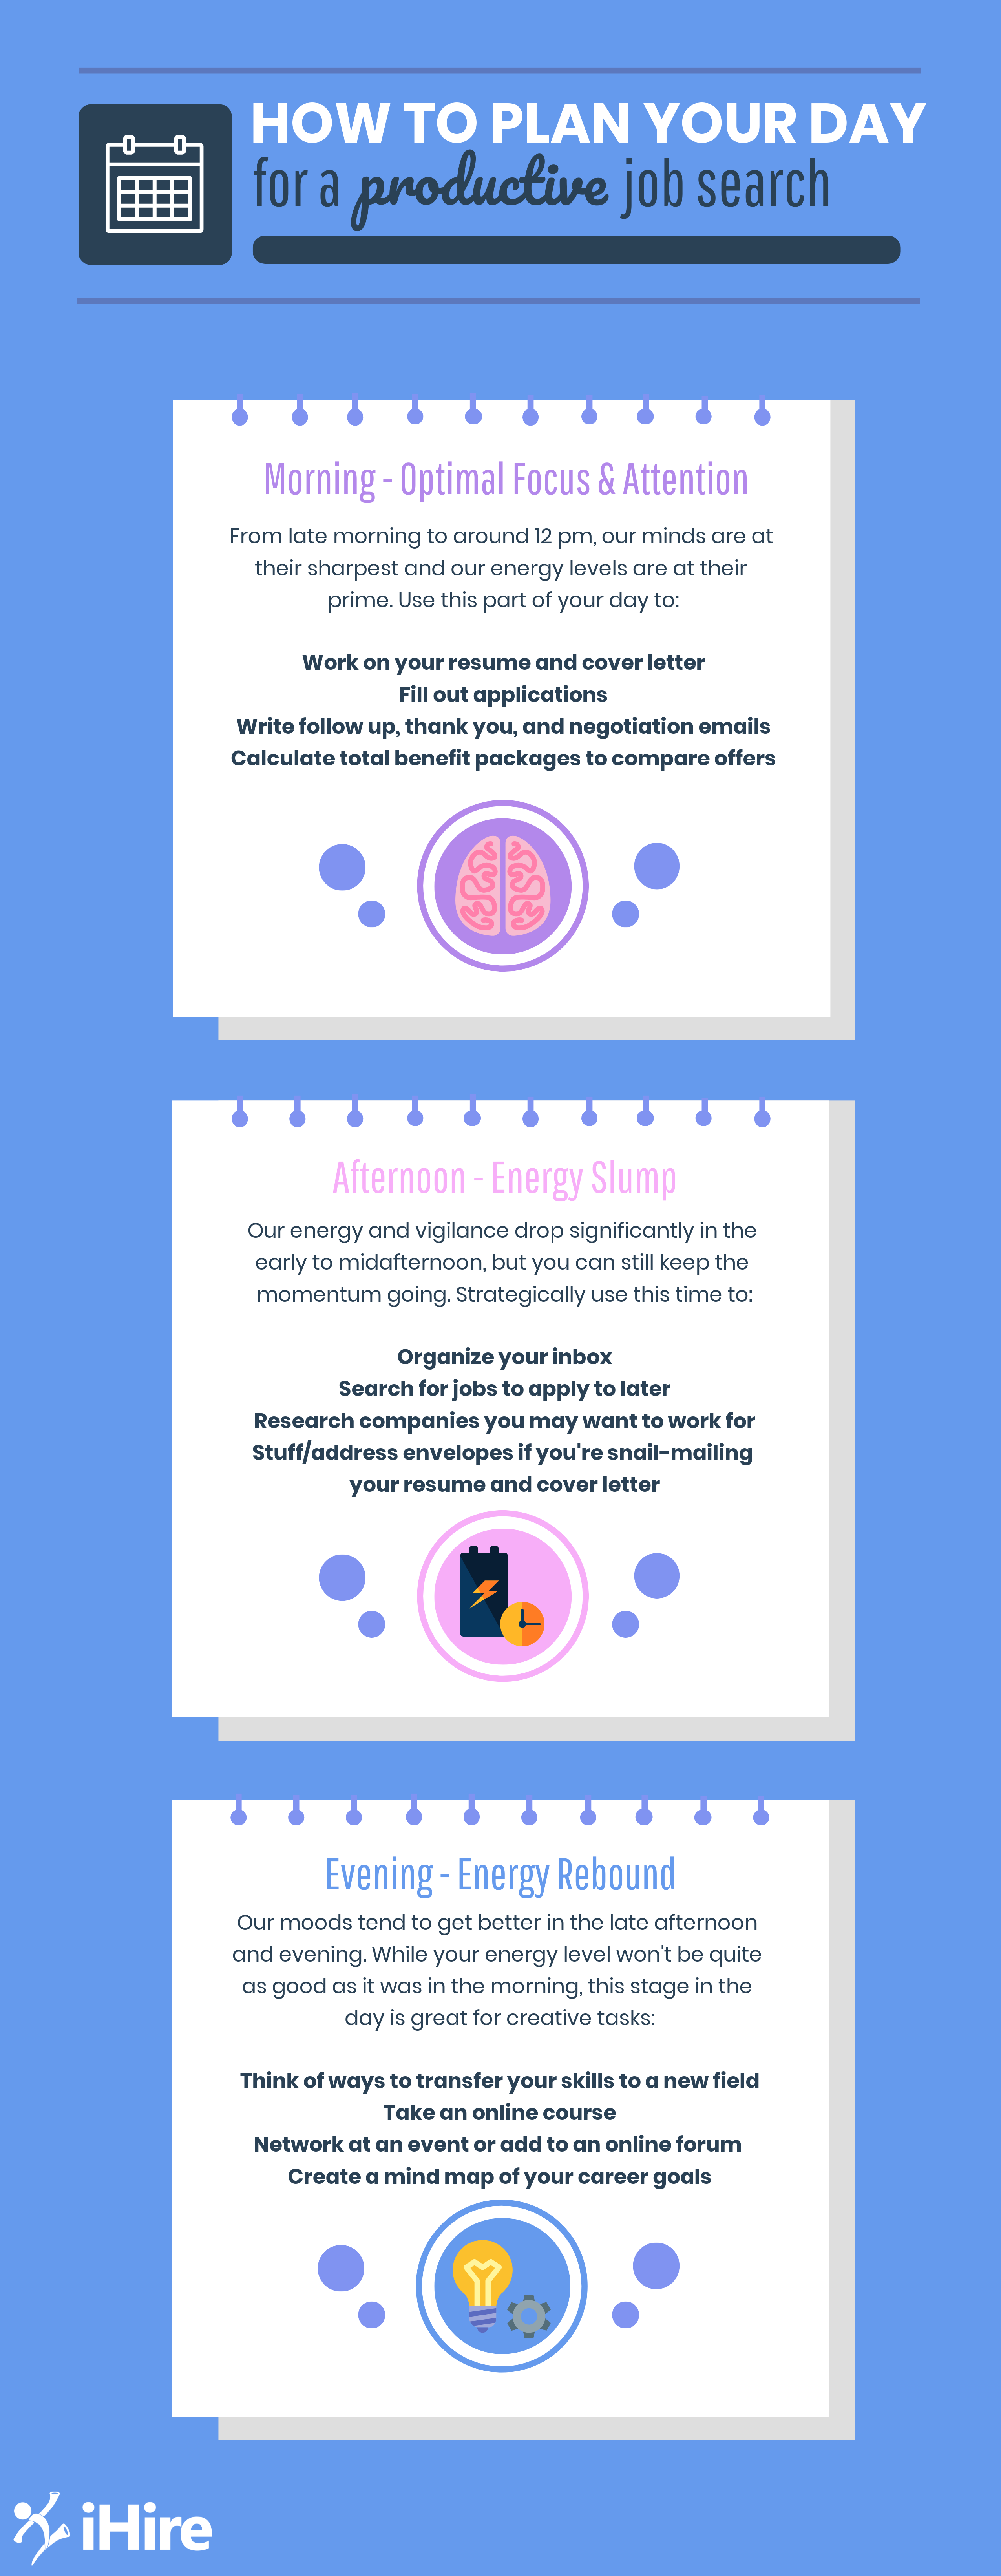 ihire infographic how to run a productive job search